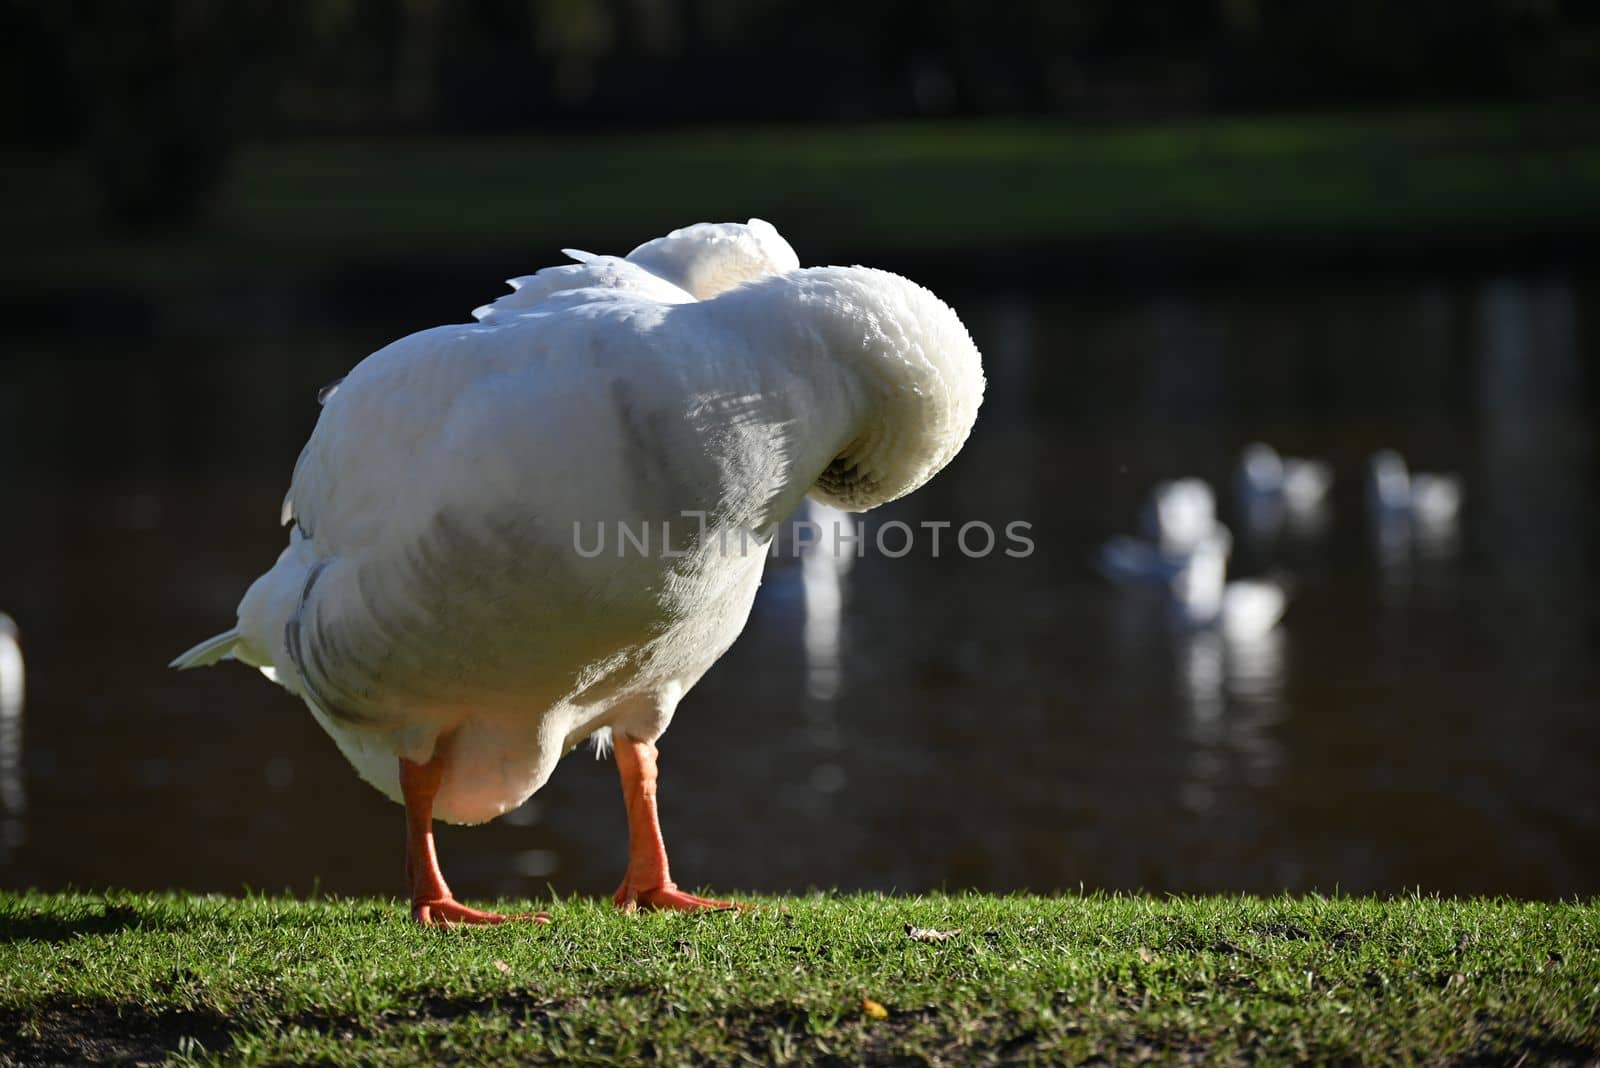 One white goose grooming her feathers in the park near a pond